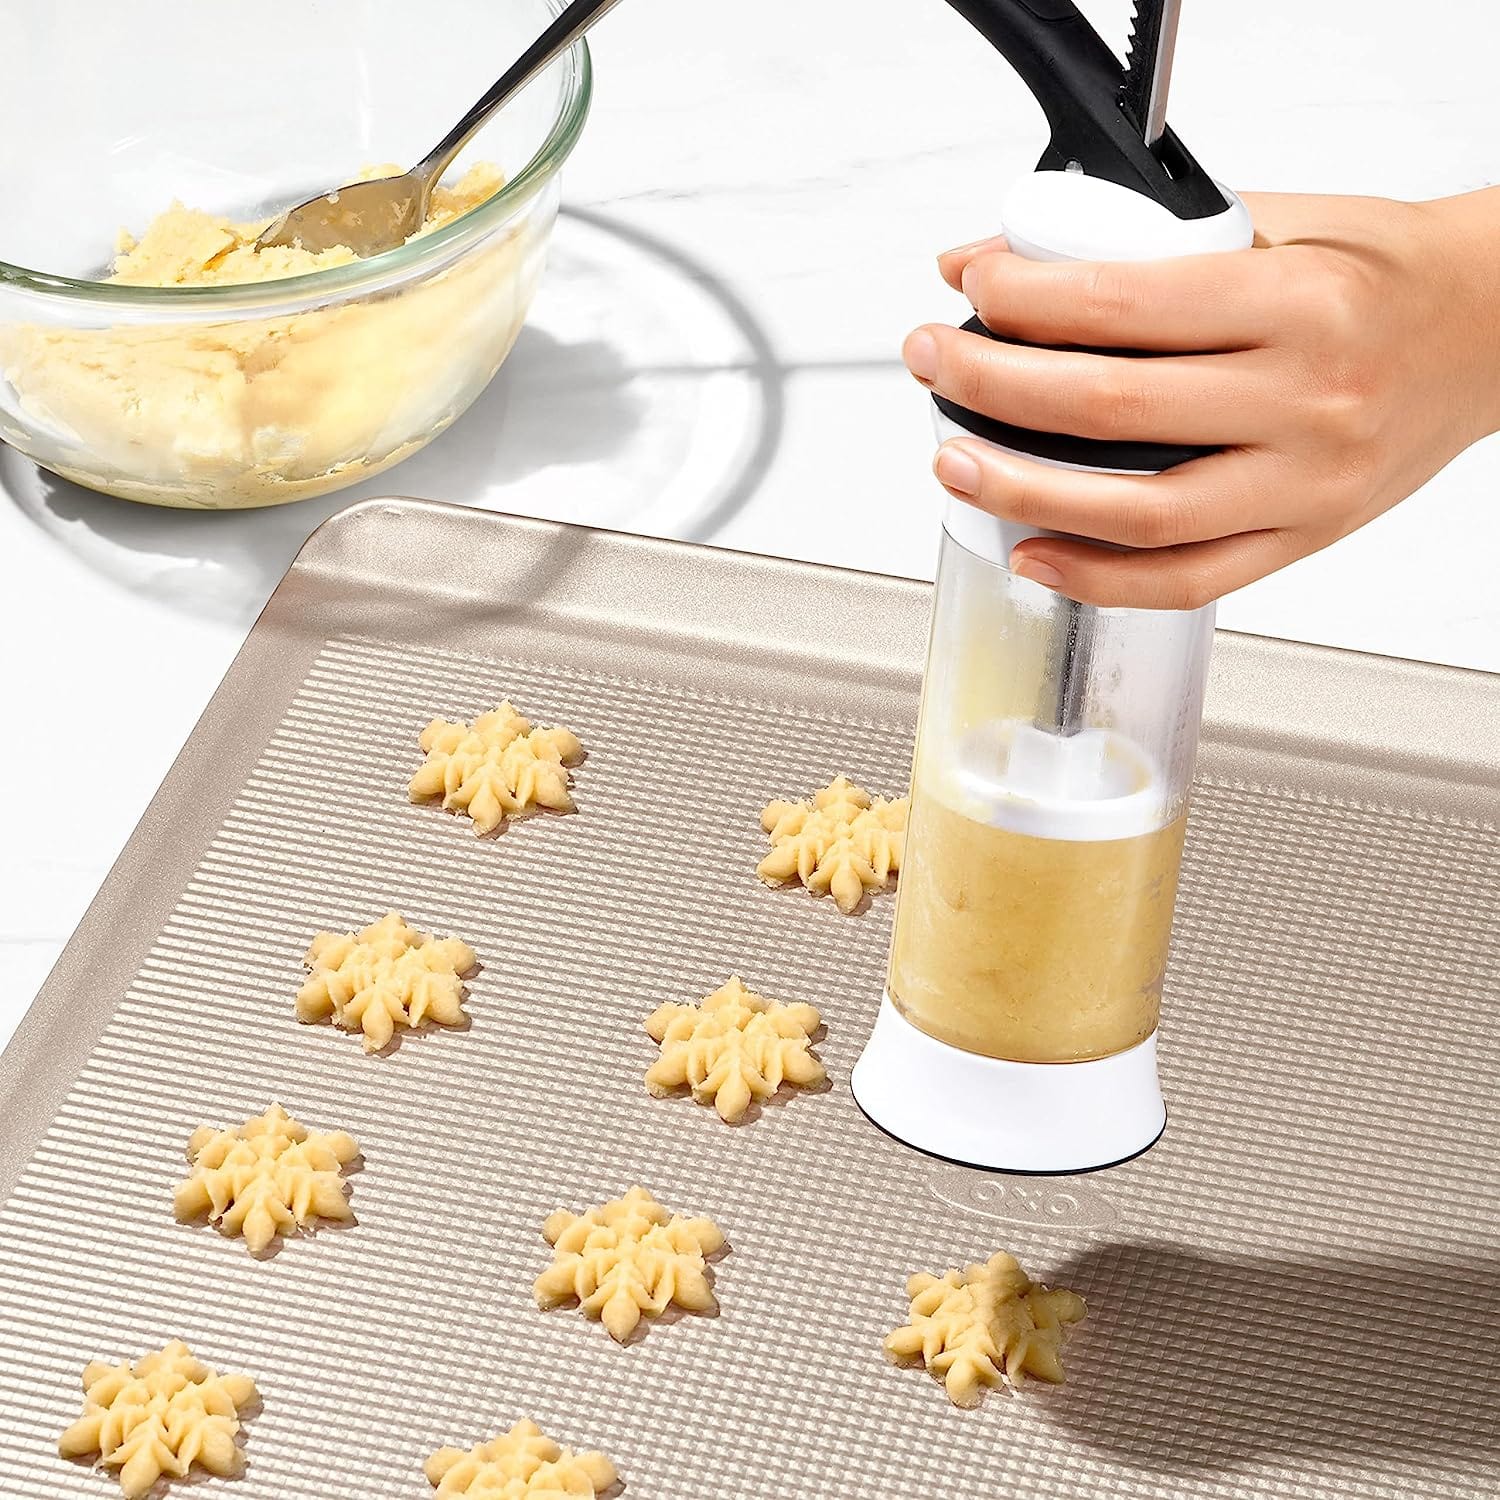 OXO Good Grips Cookie Press to Bake Perfect Cookies